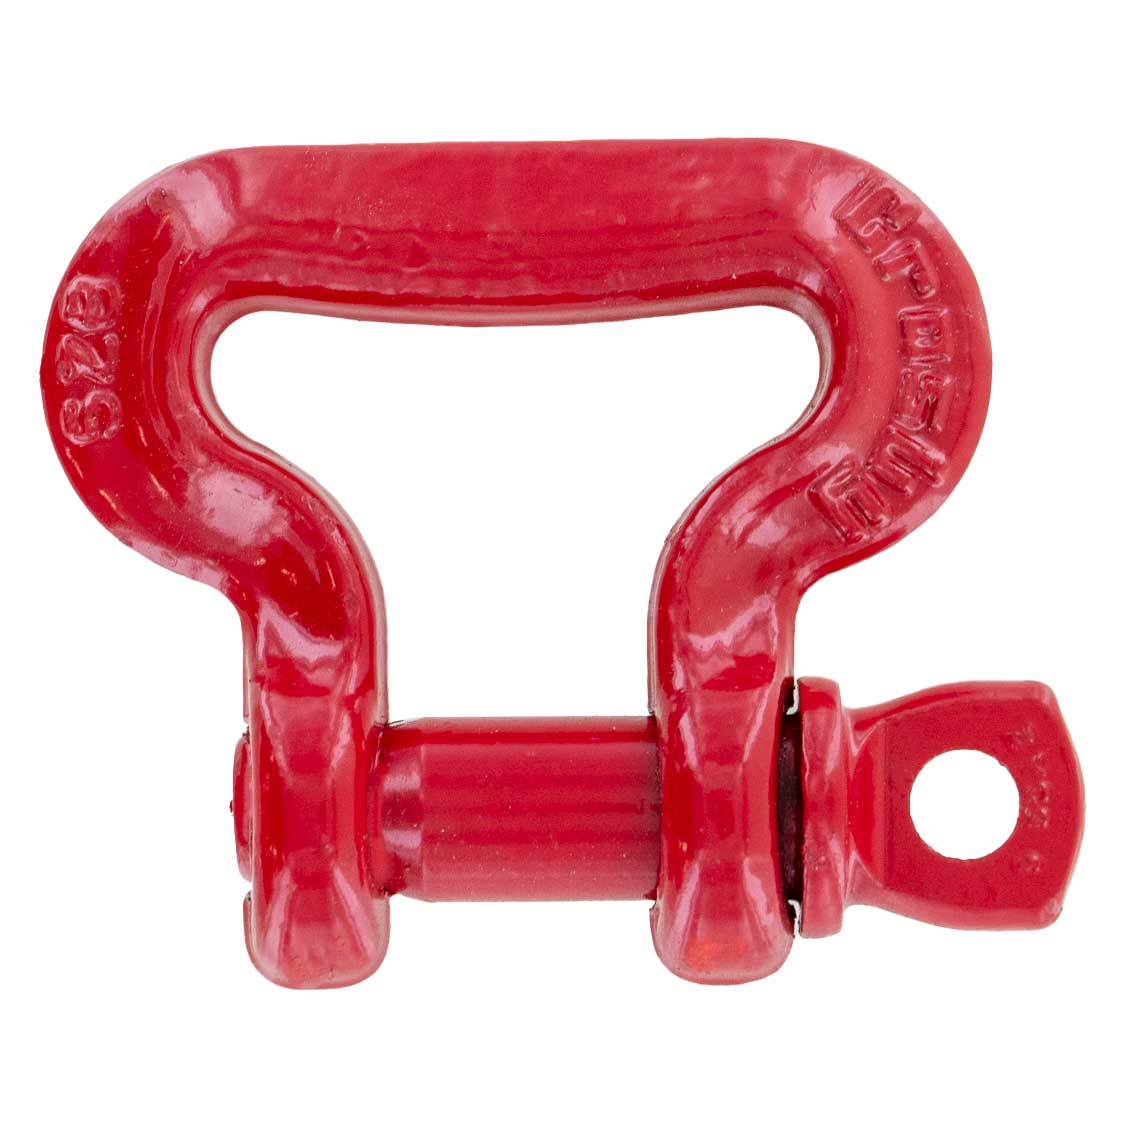 Crosby® Screw Pin Sling Saver Shackle | S-281 - 4.5 Ton primary image